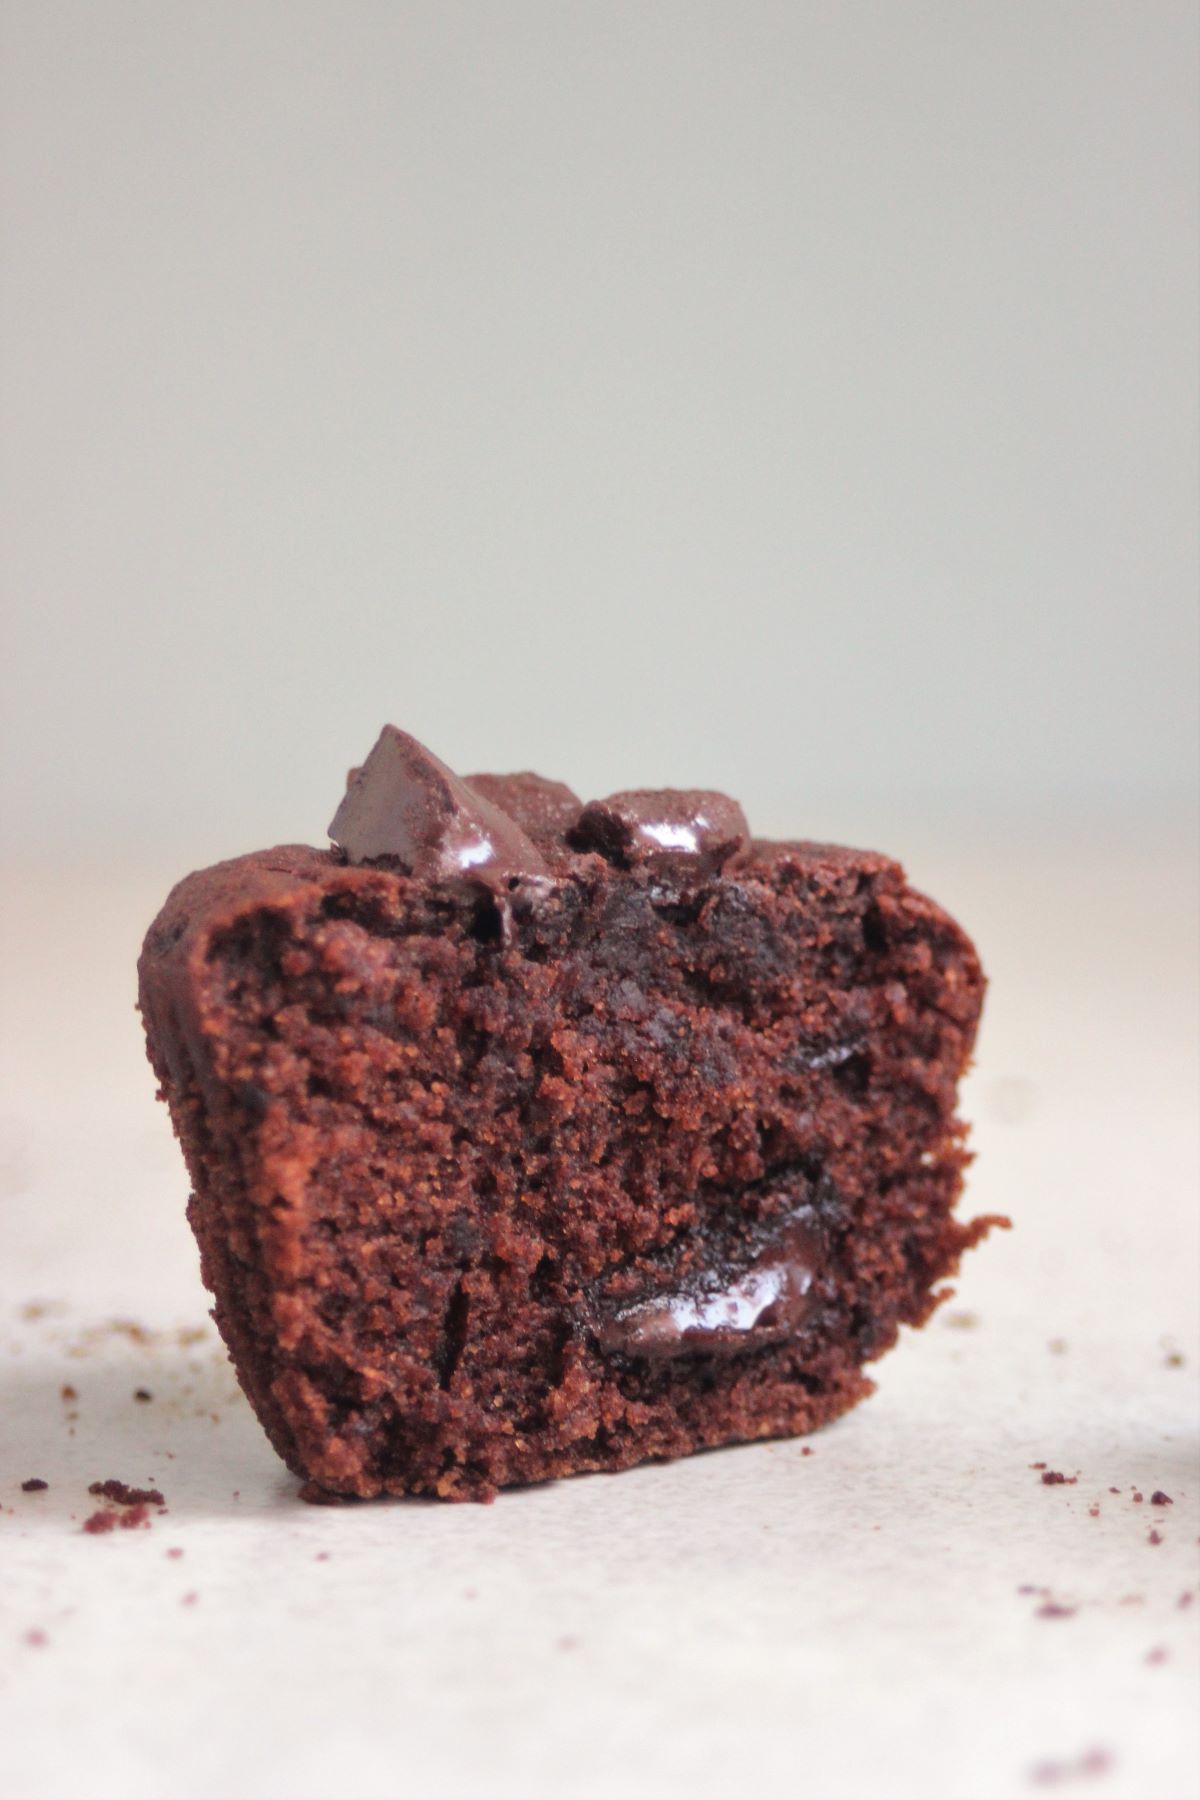 A half of a chocolate muffin viewed from the front.